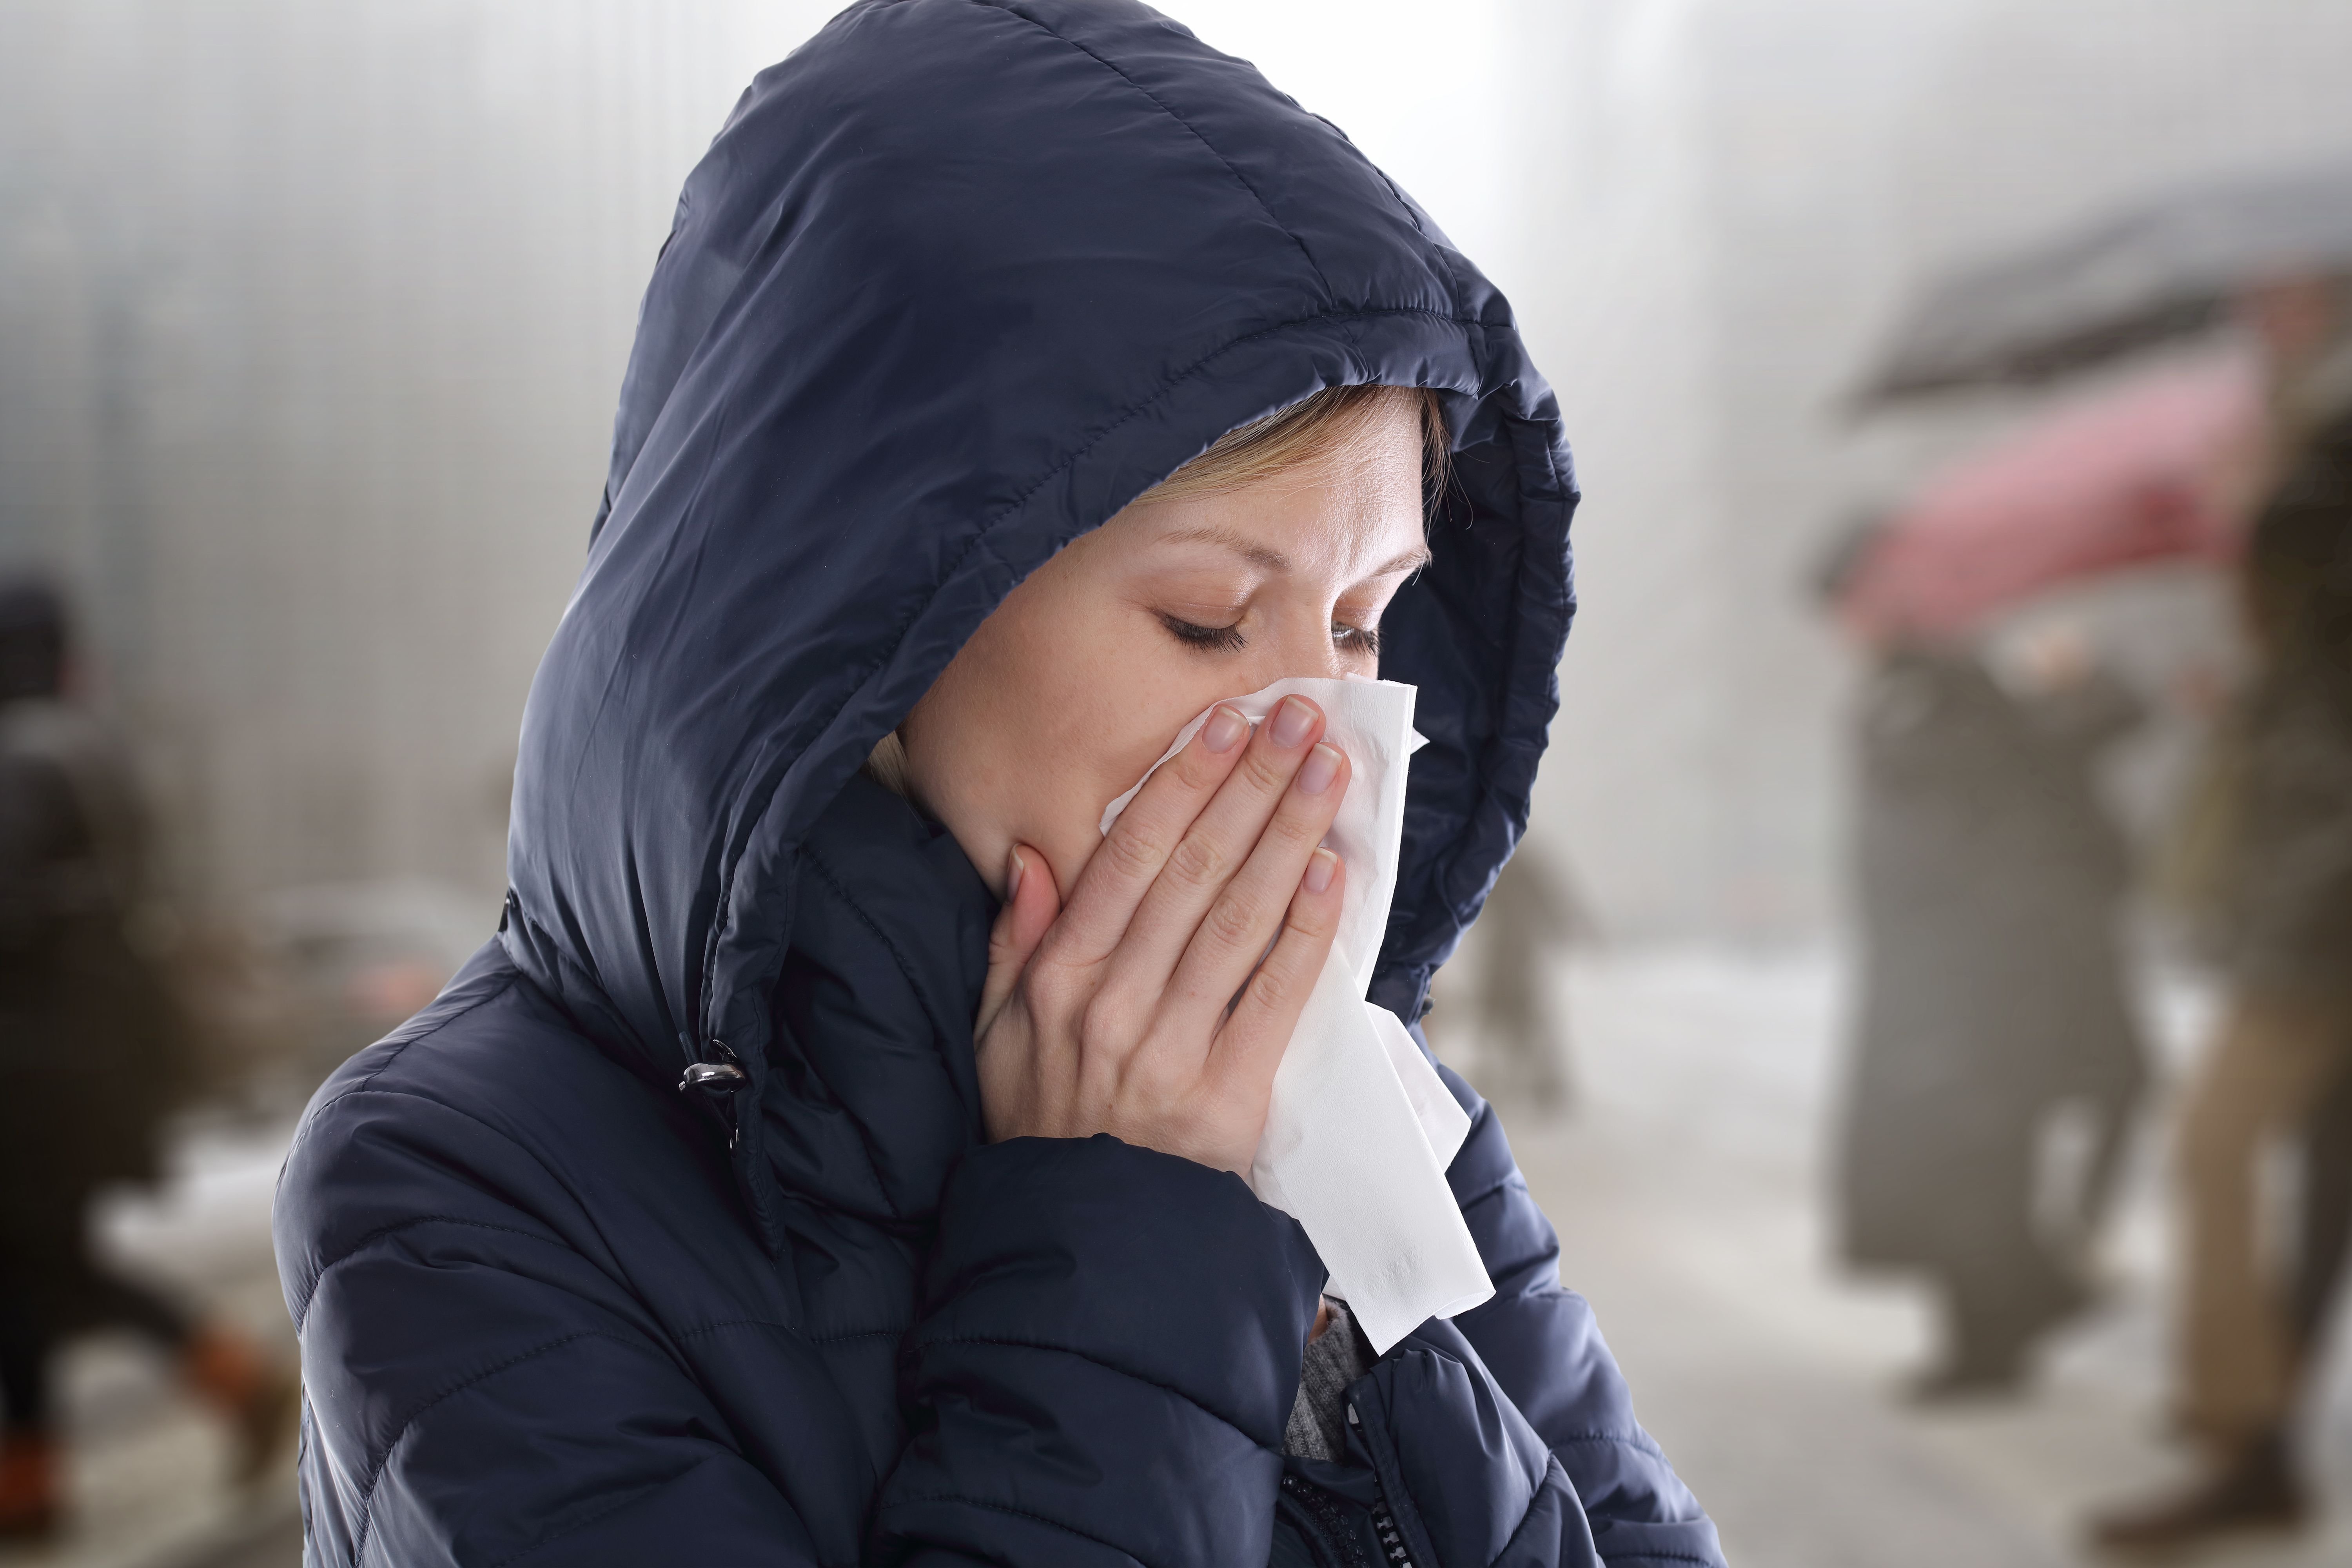 A sick woman blows her nose on tissue. | Source: Shutterstock